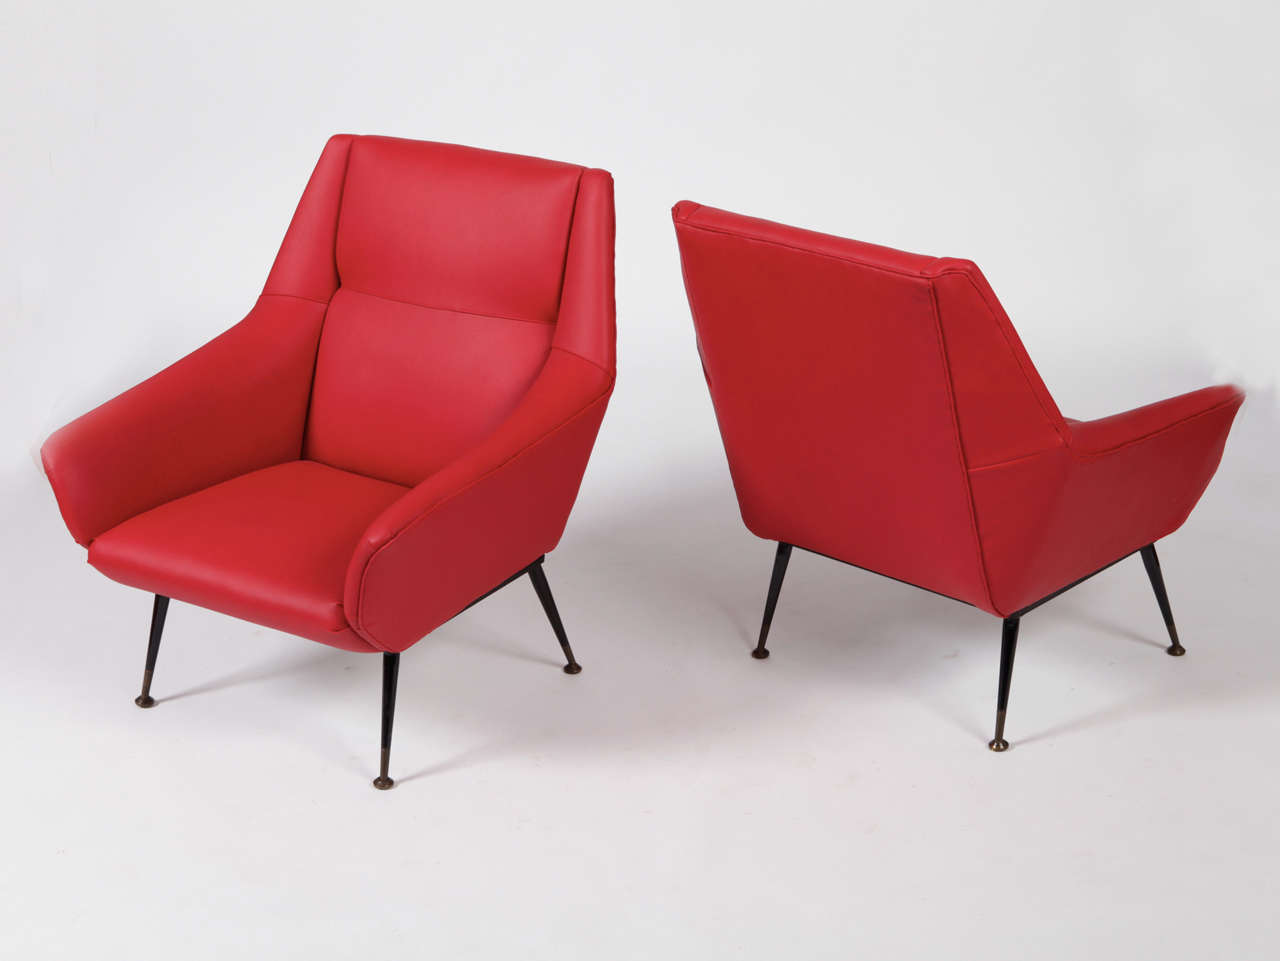 Pair of red armchair by Gio Ponti, circa 1950 
red leather, lacquered metal and brass
Misure: h 80cm 71 x 64 cm, height seat 43 cm